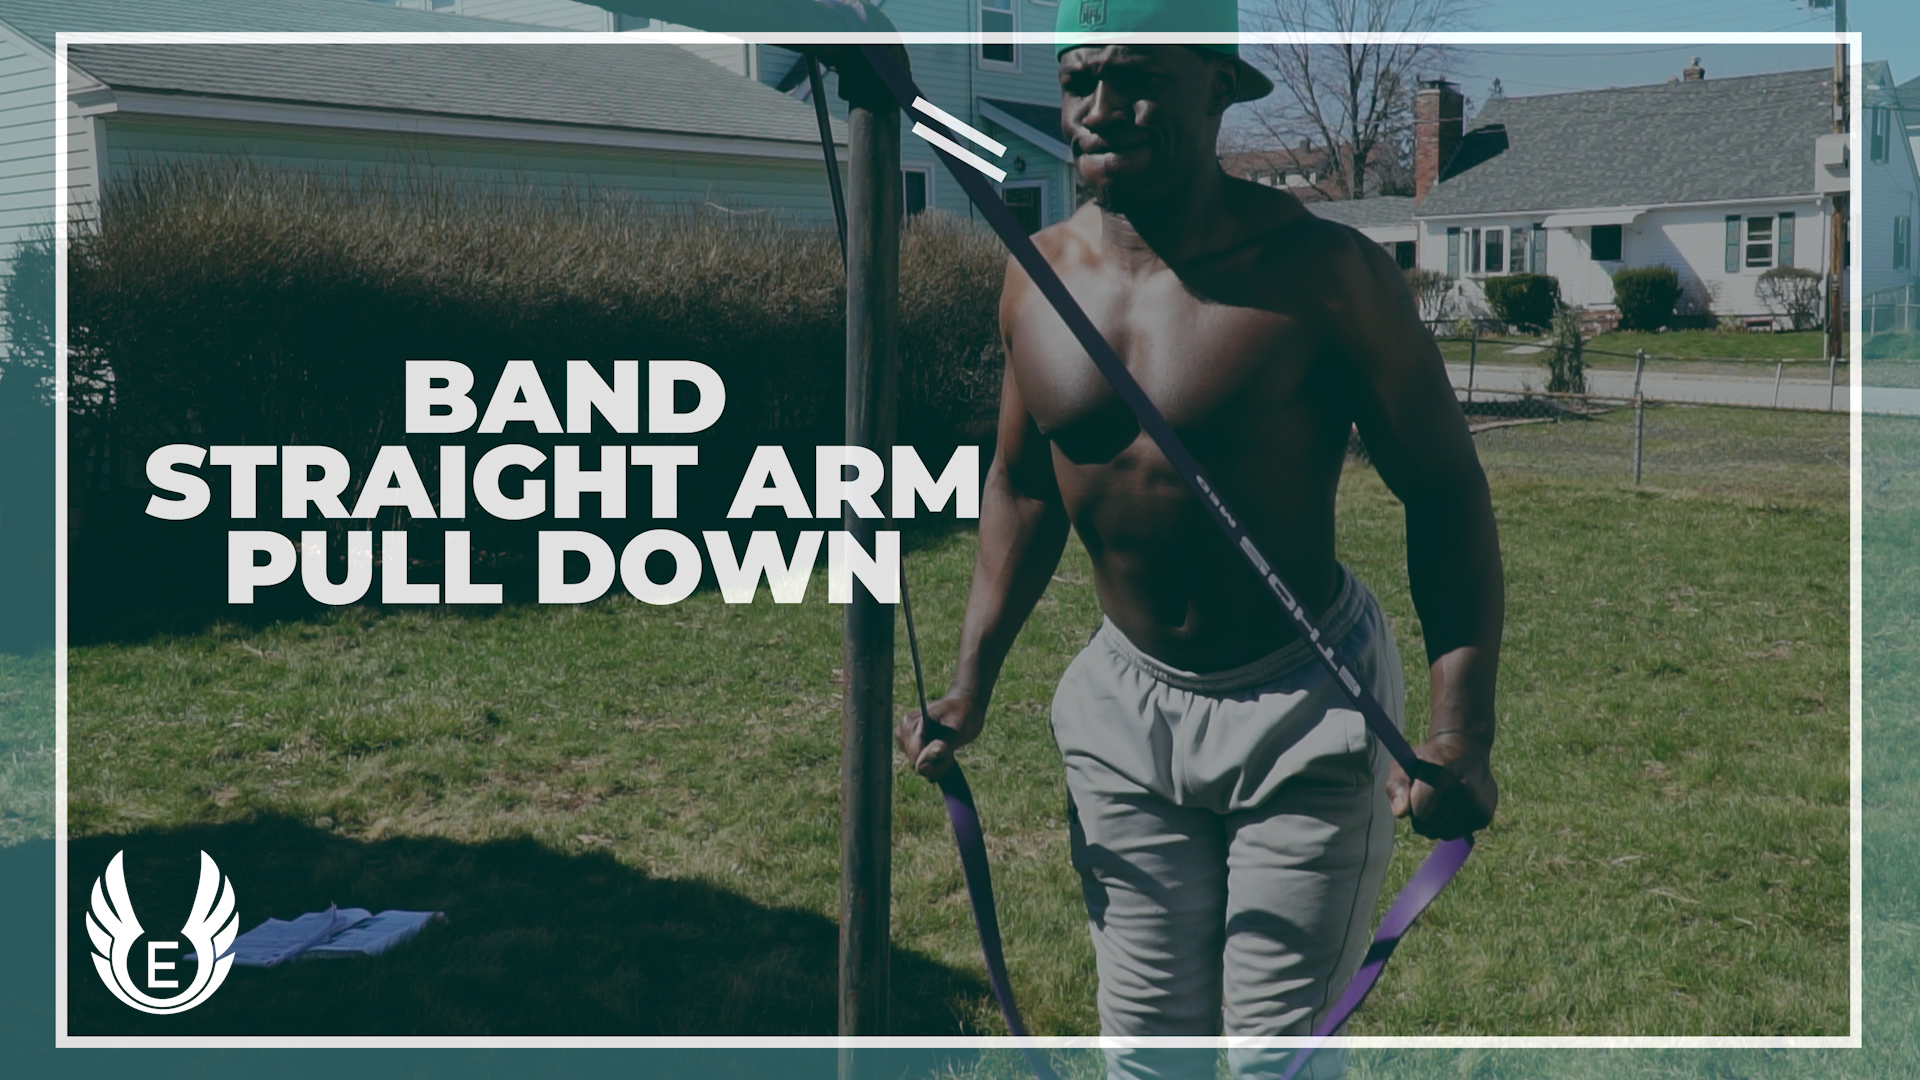 resistance band back workout band straight arm pull down. back workout at home with bands.